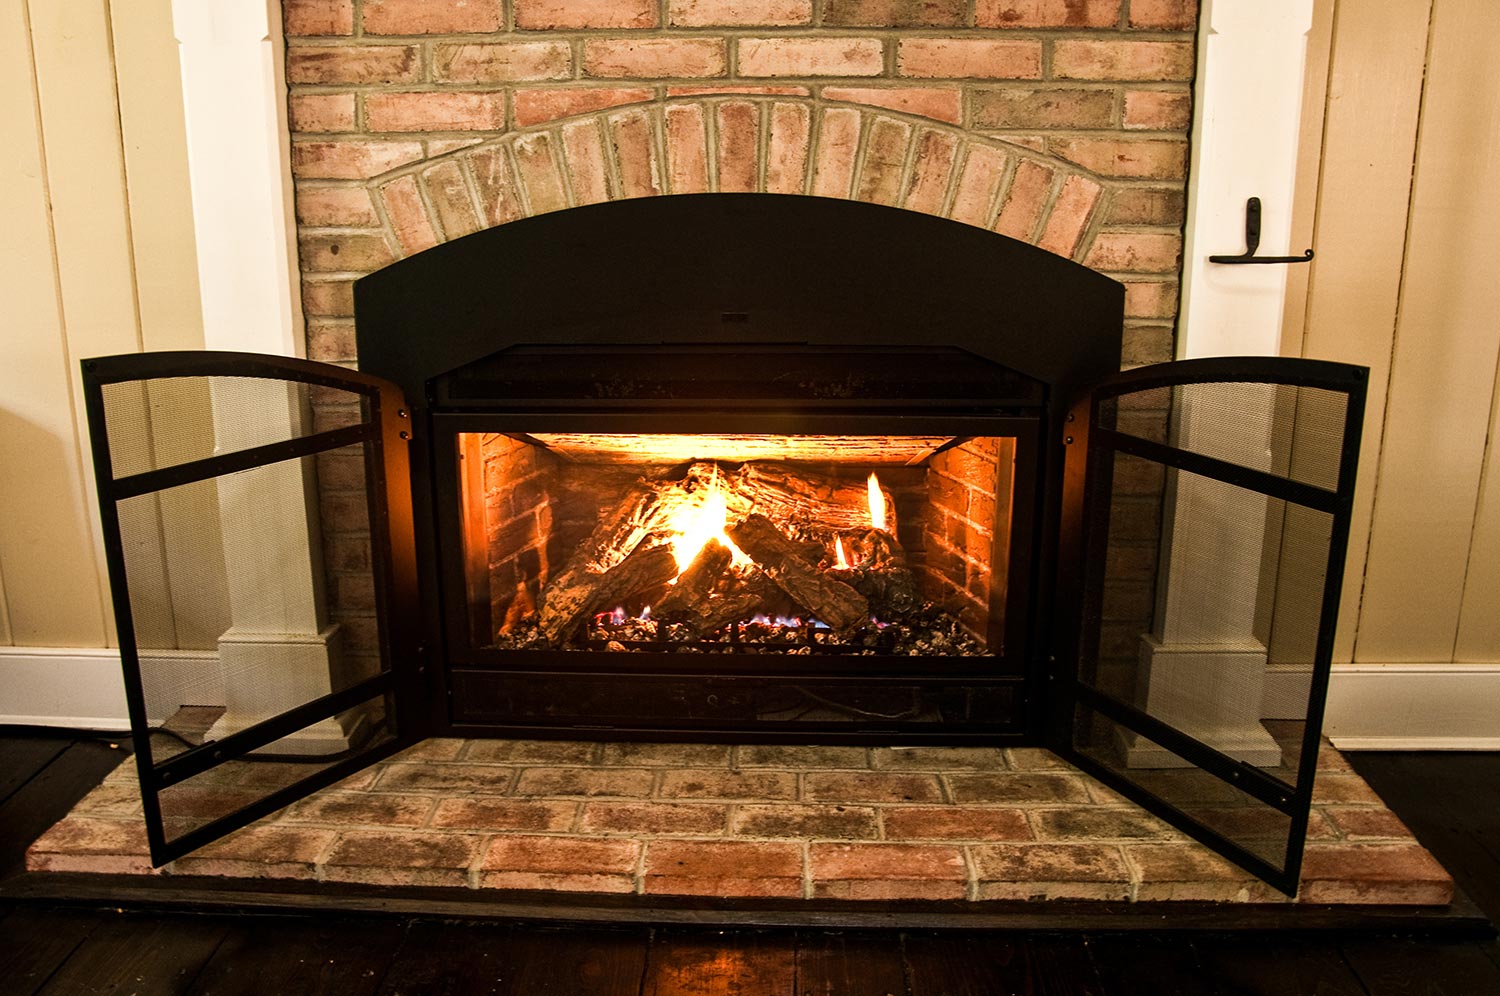 Gas fireplace provides warmth during cold winter